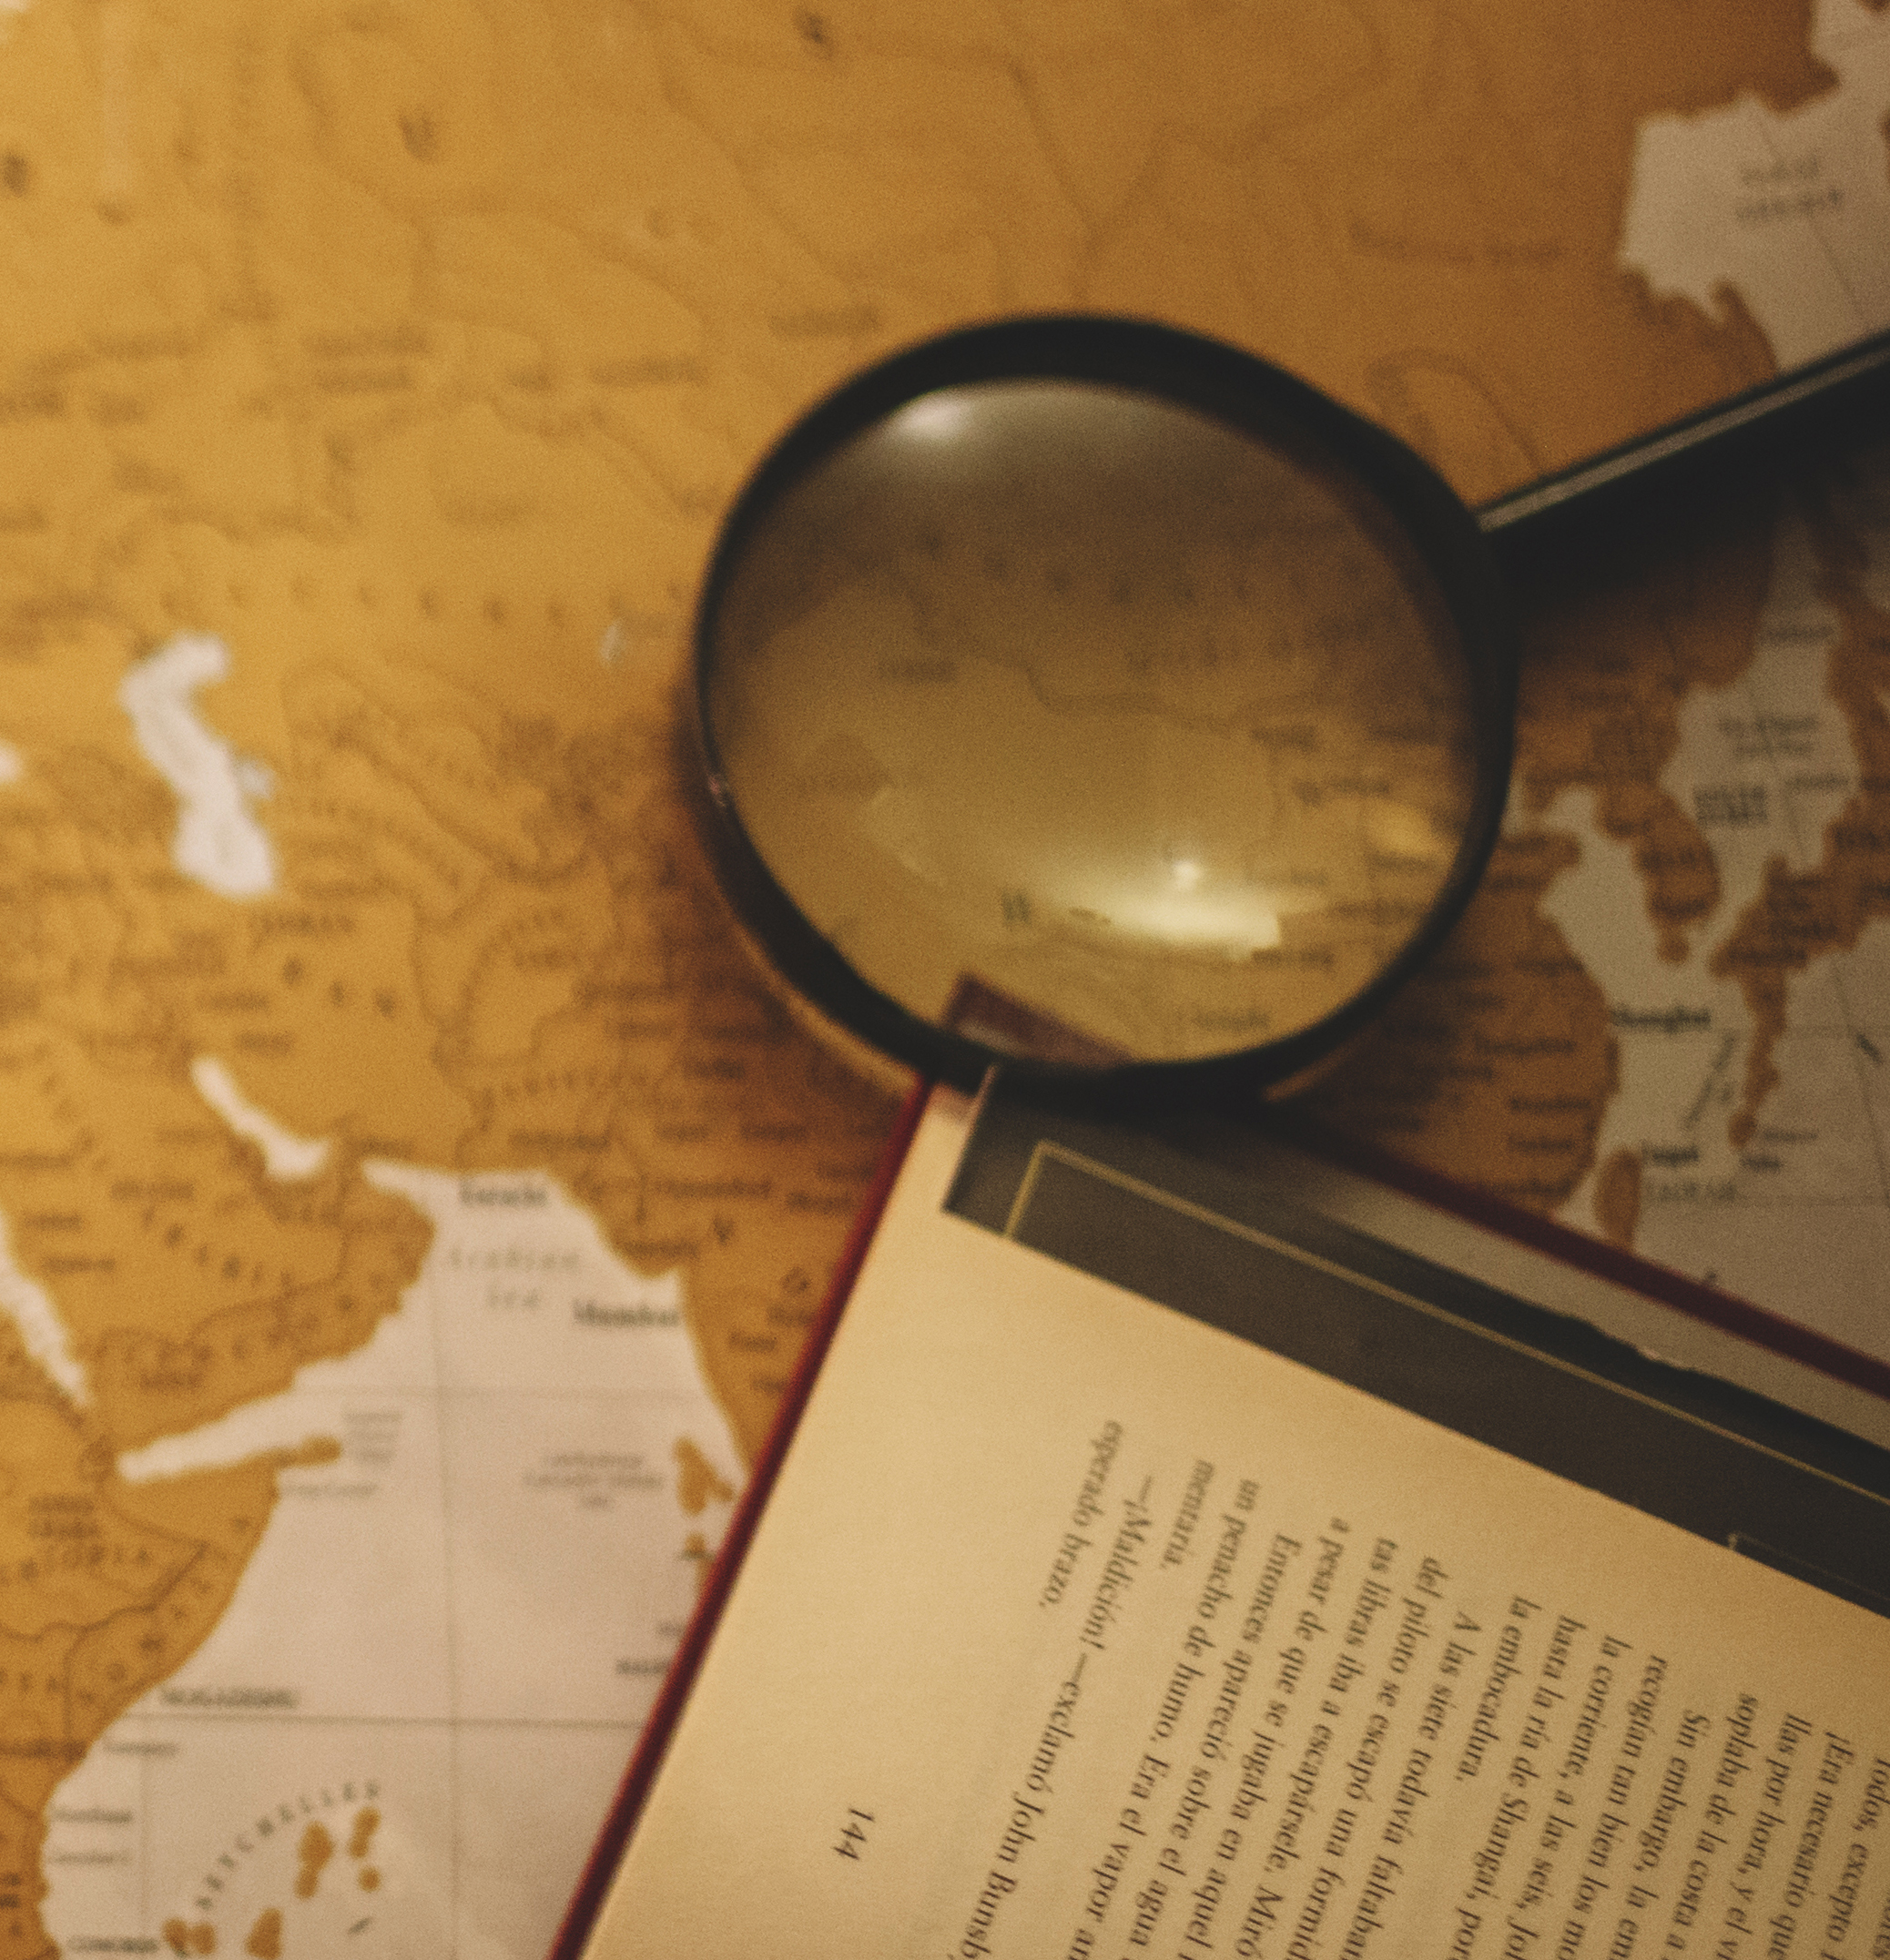 A photo of a map with a magnifying glass and open book